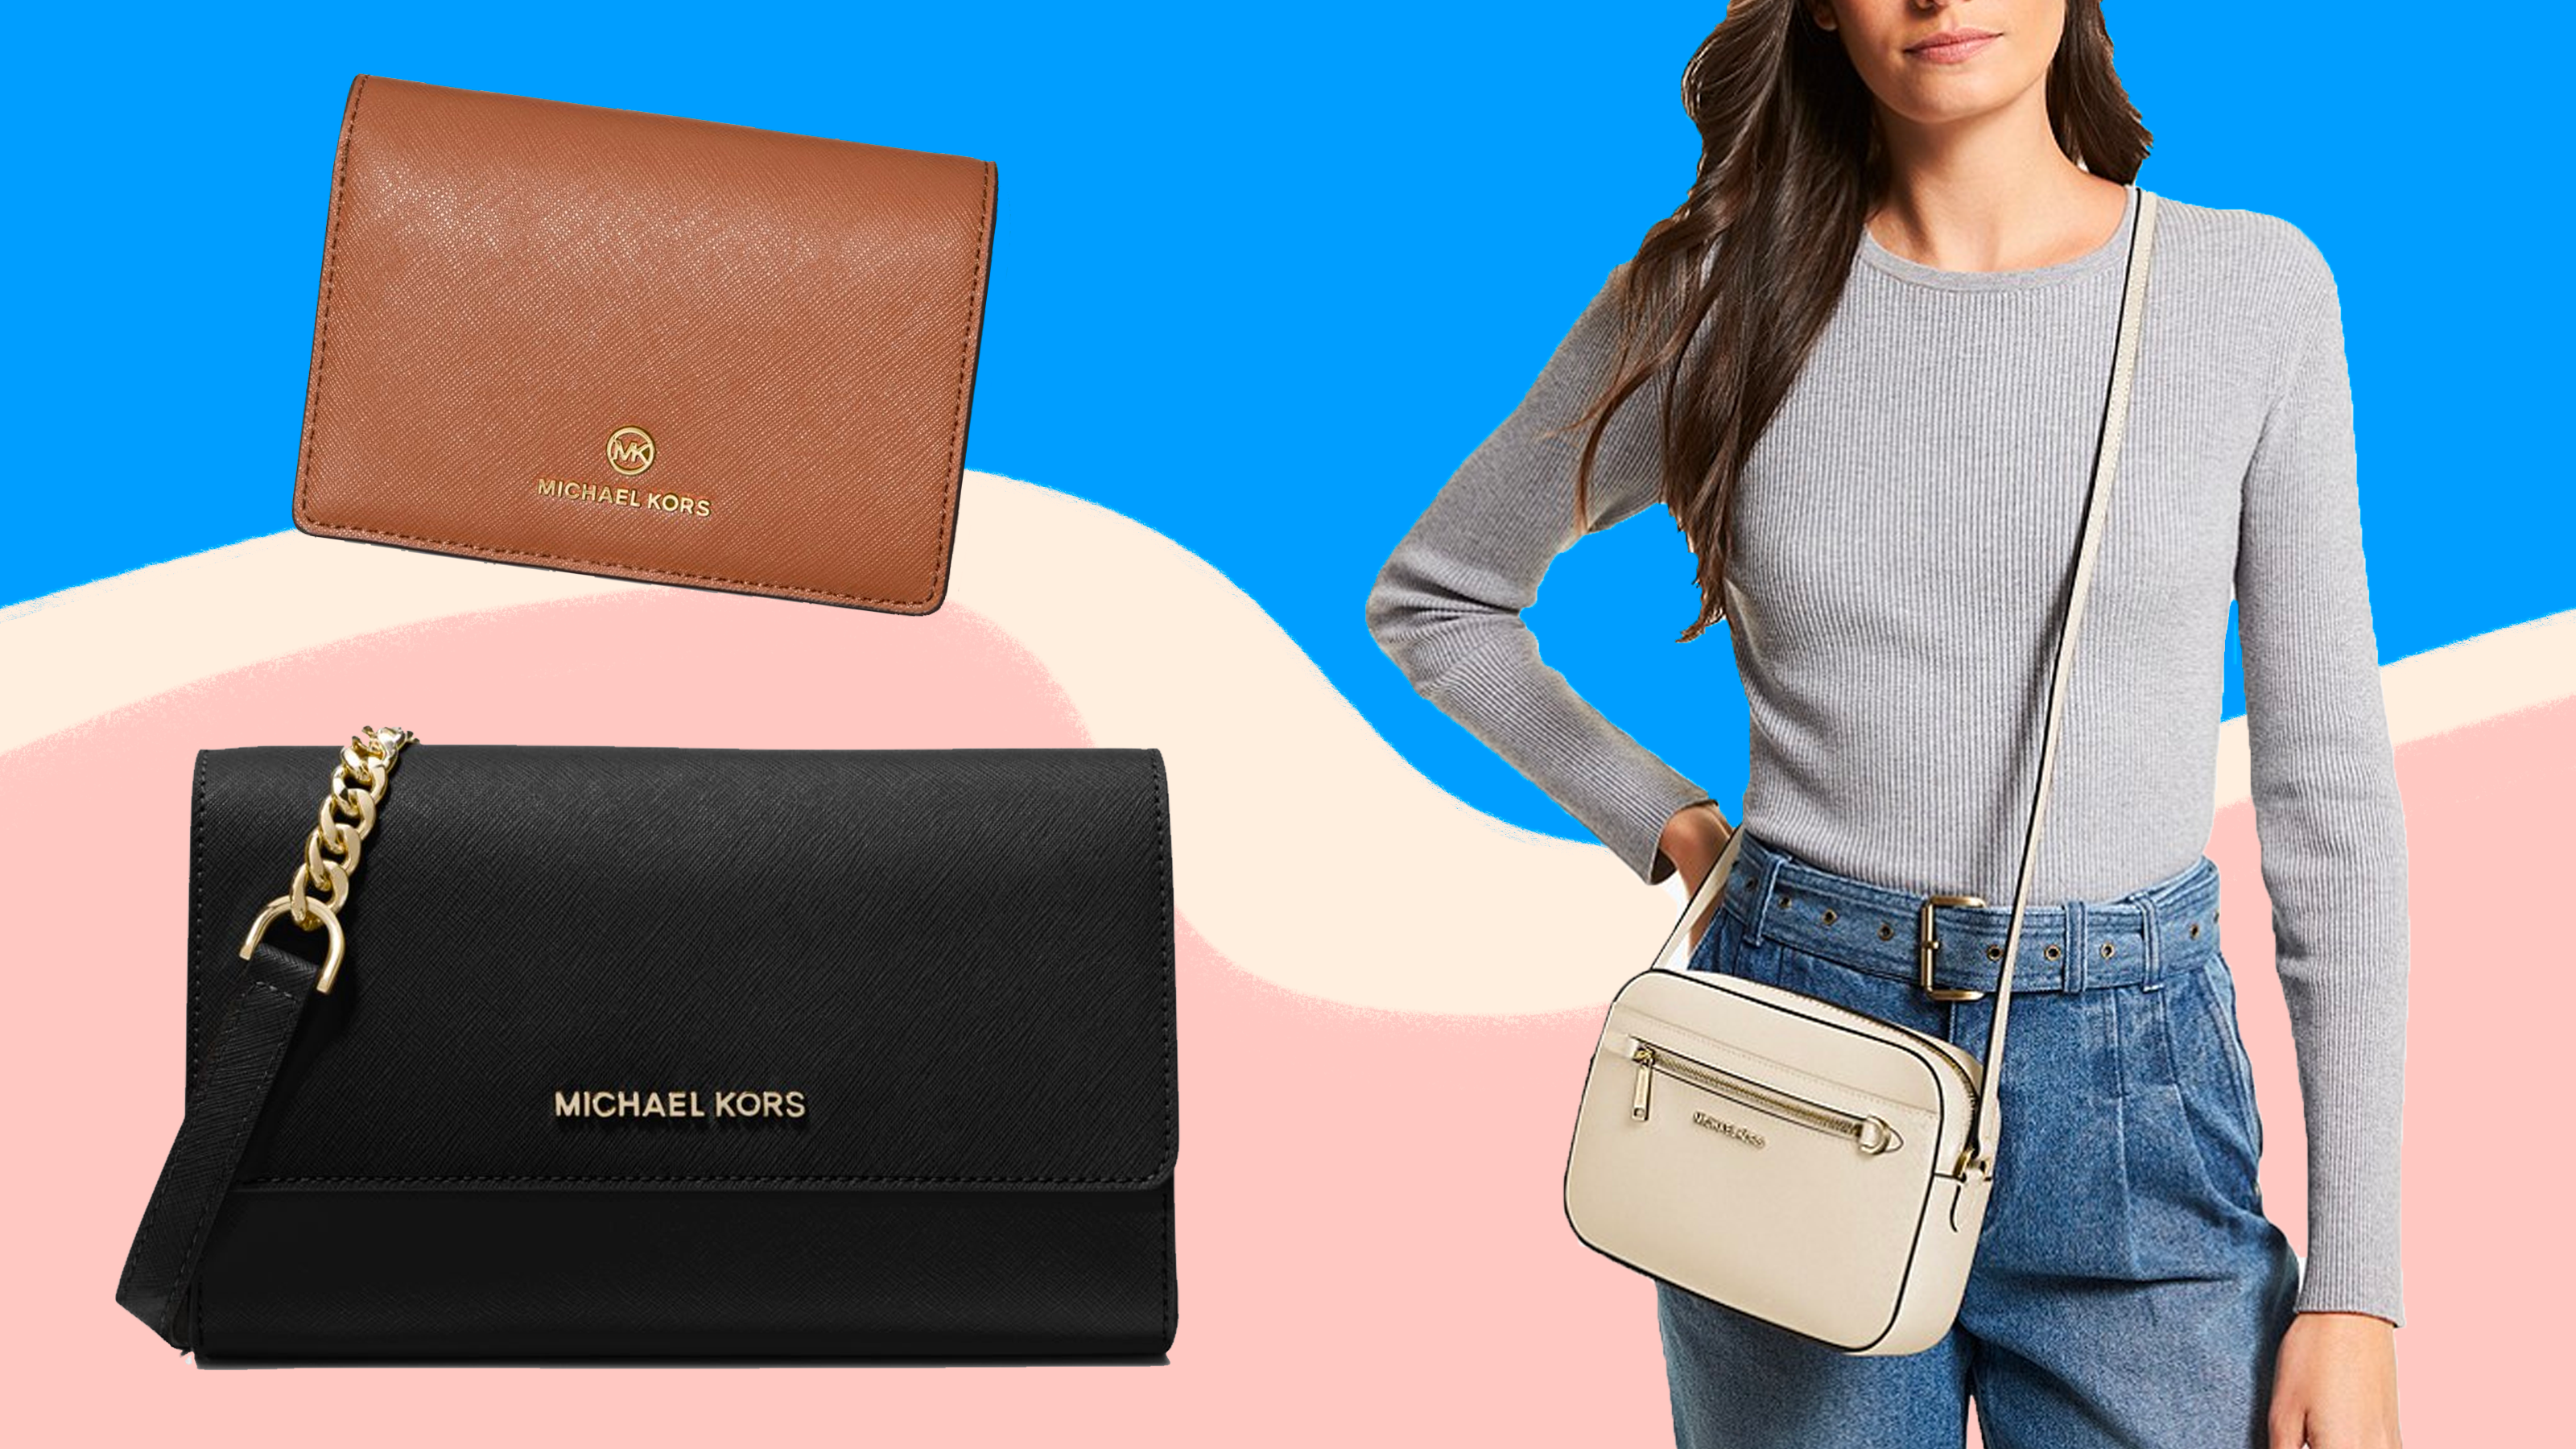 Michael Kors: Get a purse for a massive markdown right now